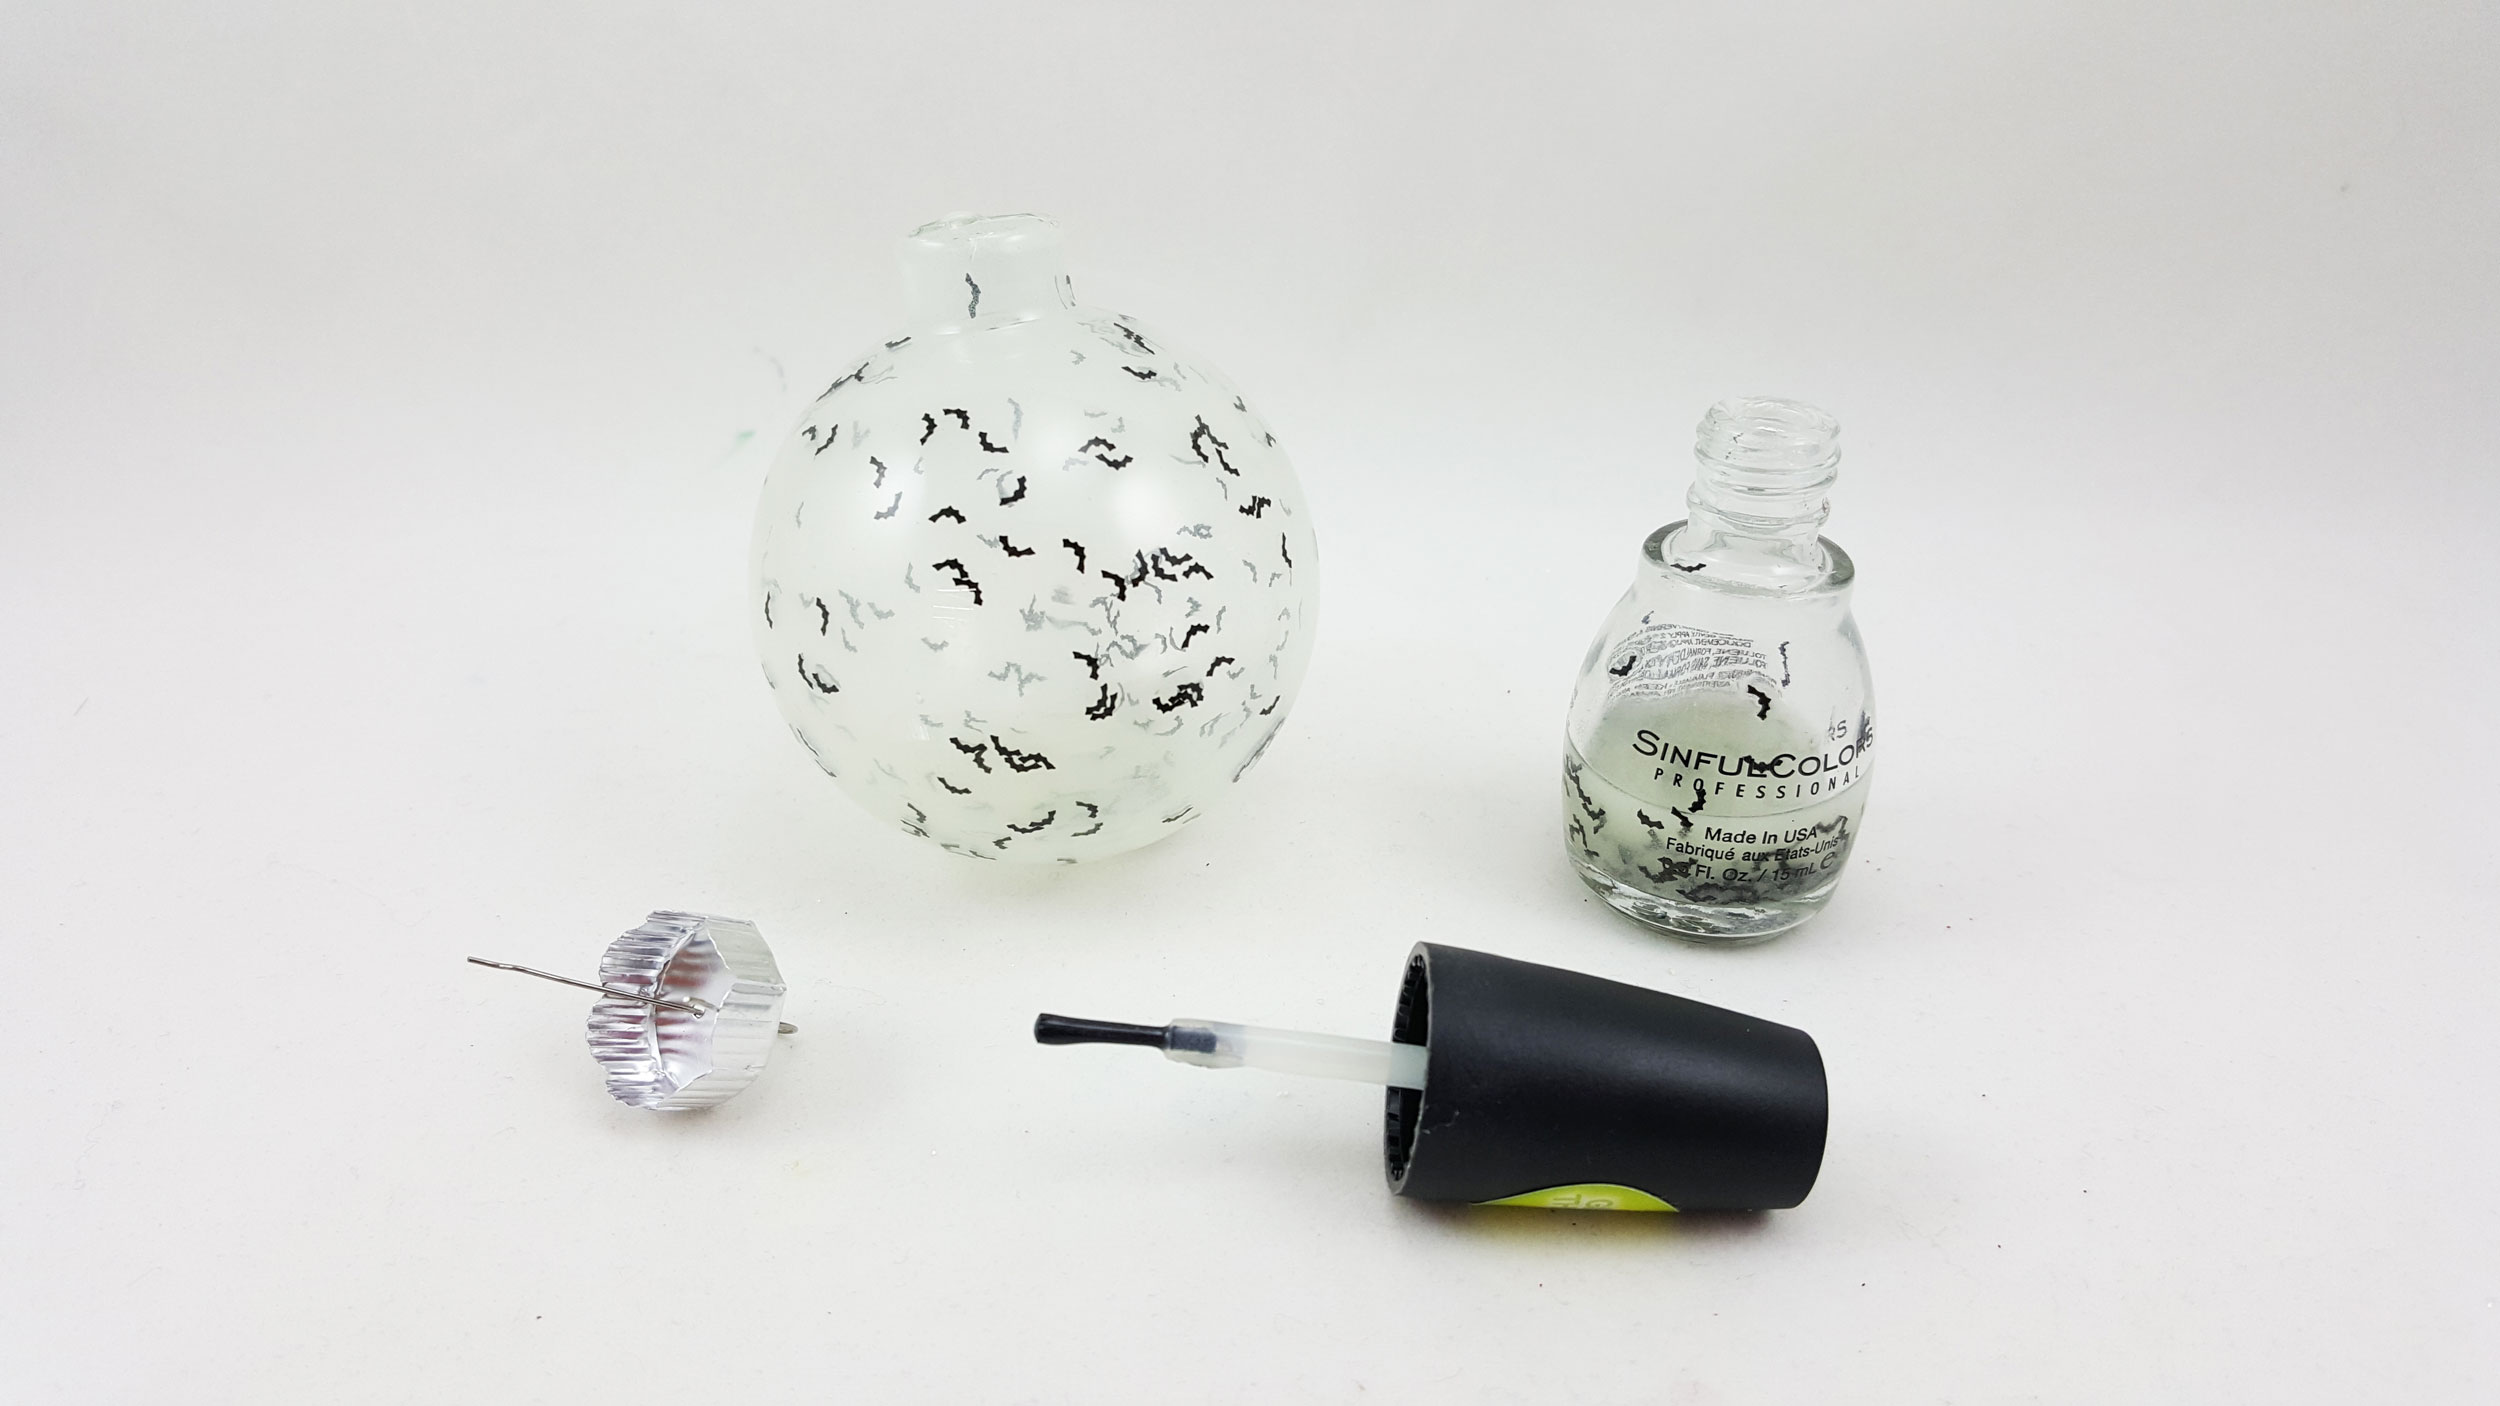 Step 1 is to carefully remove the cap from the clear glass ball ornament and sprinkle the confetti inside, then pour your glow in the dark paint or nail polish inside, swirling it around. | OrnamentShop.com